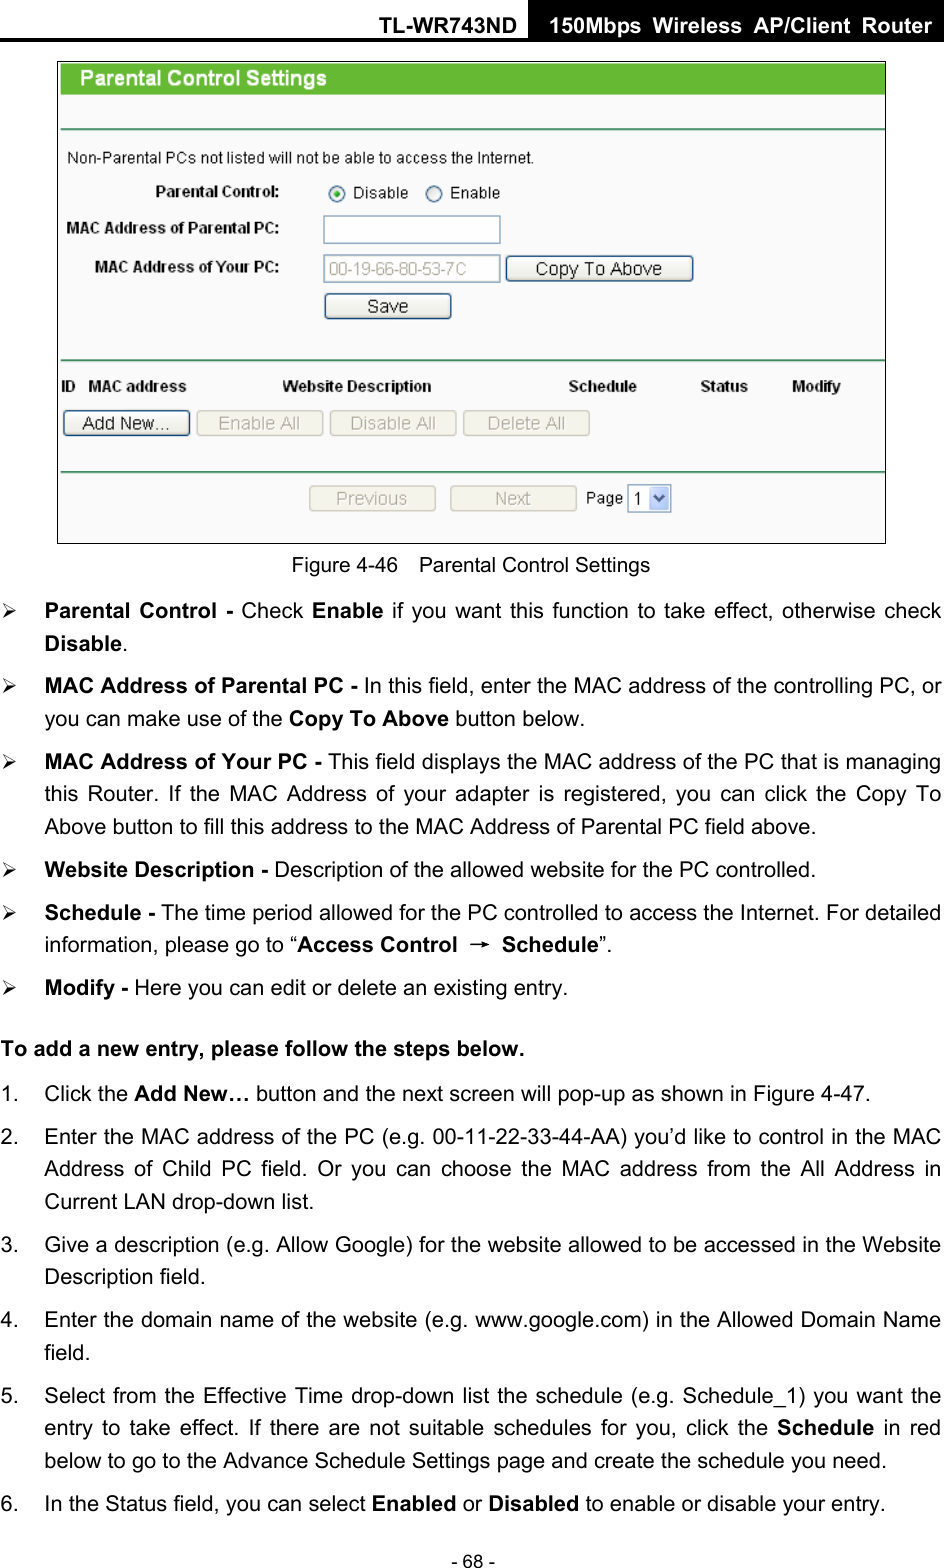 TL-WR743ND 150Mbps Wireless AP/Client Router - 68 -  Figure 4-46    Parental Control Settings ¾ Parental Control - Check Enable if you want this function to take effect, otherwise check Disable.  ¾ MAC Address of Parental PC - In this field, enter the MAC address of the controlling PC, or you can make use of the Copy To Above button below.   ¾ MAC Address of Your PC - This field displays the MAC address of the PC that is managing this Router. If the MAC Address of your adapter is registered, you can click the Copy To Above button to fill this address to the MAC Address of Parental PC field above.   ¾ Website Description - Description of the allowed website for the PC controlled.   ¾ Schedule - The time period allowed for the PC controlled to access the Internet. For detailed information, please go to “Access Control  → Schedule”.  ¾ Modify - Here you can edit or delete an existing entry.   To add a new entry, please follow the steps below. 1. Click the Add New… button and the next screen will pop-up as shown in Figure 4-47. 2.  Enter the MAC address of the PC (e.g. 00-11-22-33-44-AA) you’d like to control in the MAC Address of Child PC field. Or you can choose the MAC address from the All Address in Current LAN drop-down list. 3.  Give a description (e.g. Allow Google) for the website allowed to be accessed in the Website Description field. 4.  Enter the domain name of the website (e.g. www.google.com) in the Allowed Domain Name field. 5.  Select from the Effective Time drop-down list the schedule (e.g. Schedule_1) you want the entry to take effect. If there are not suitable schedules for you, click the Schedule  in red below to go to the Advance Schedule Settings page and create the schedule you need. 6.  In the Status field, you can select Enabled or Disabled to enable or disable your entry. 